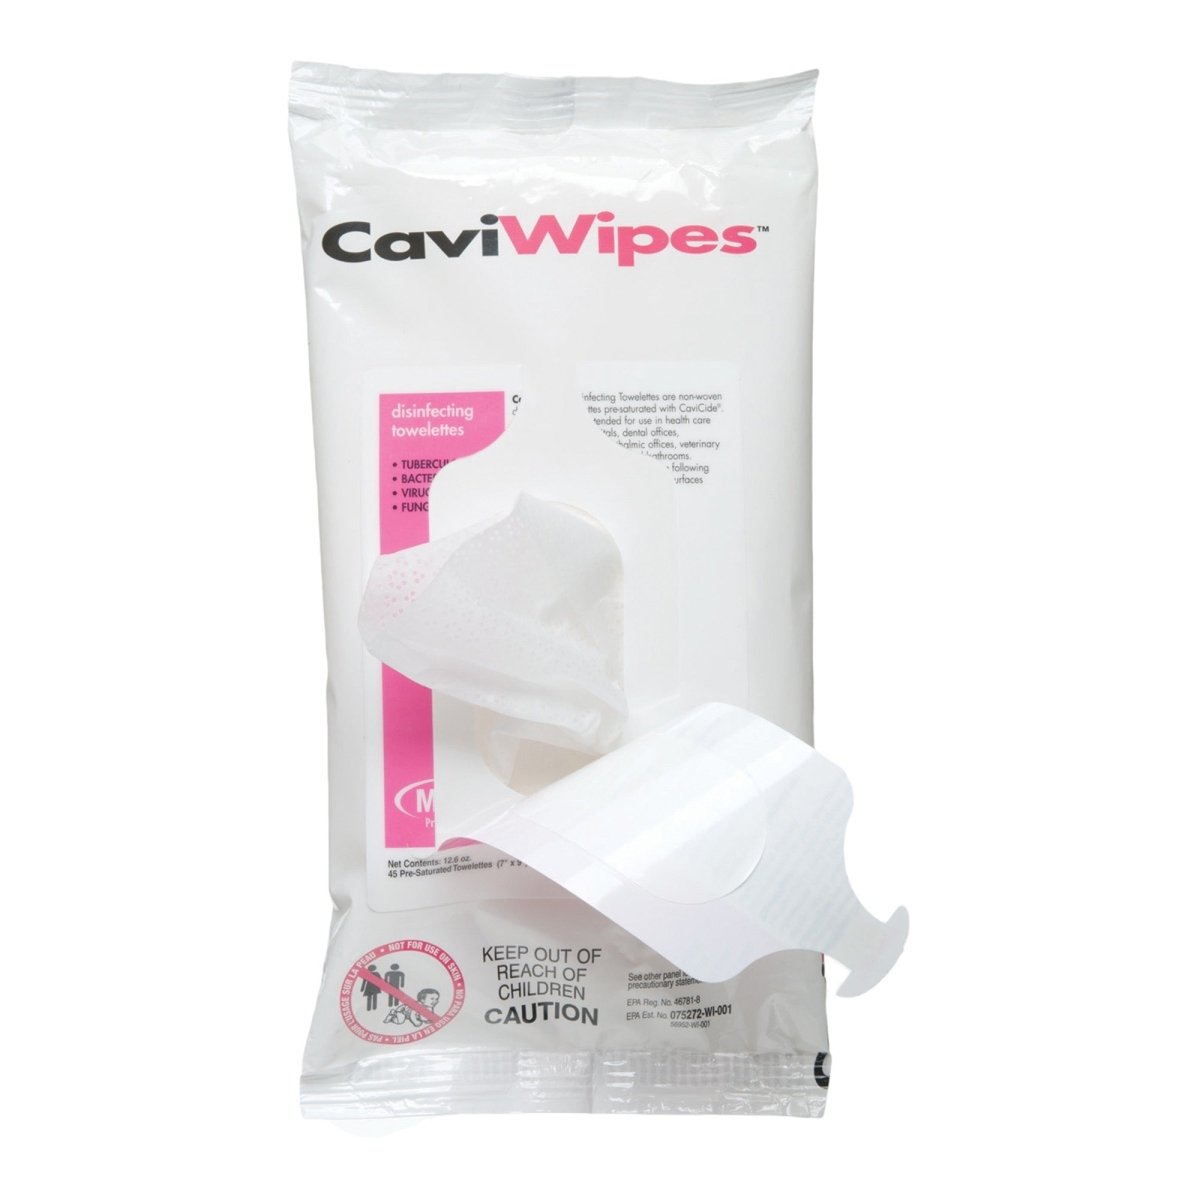 CaviWipes Surface Disinfectant Wipe 7" x 9", Flat Pack